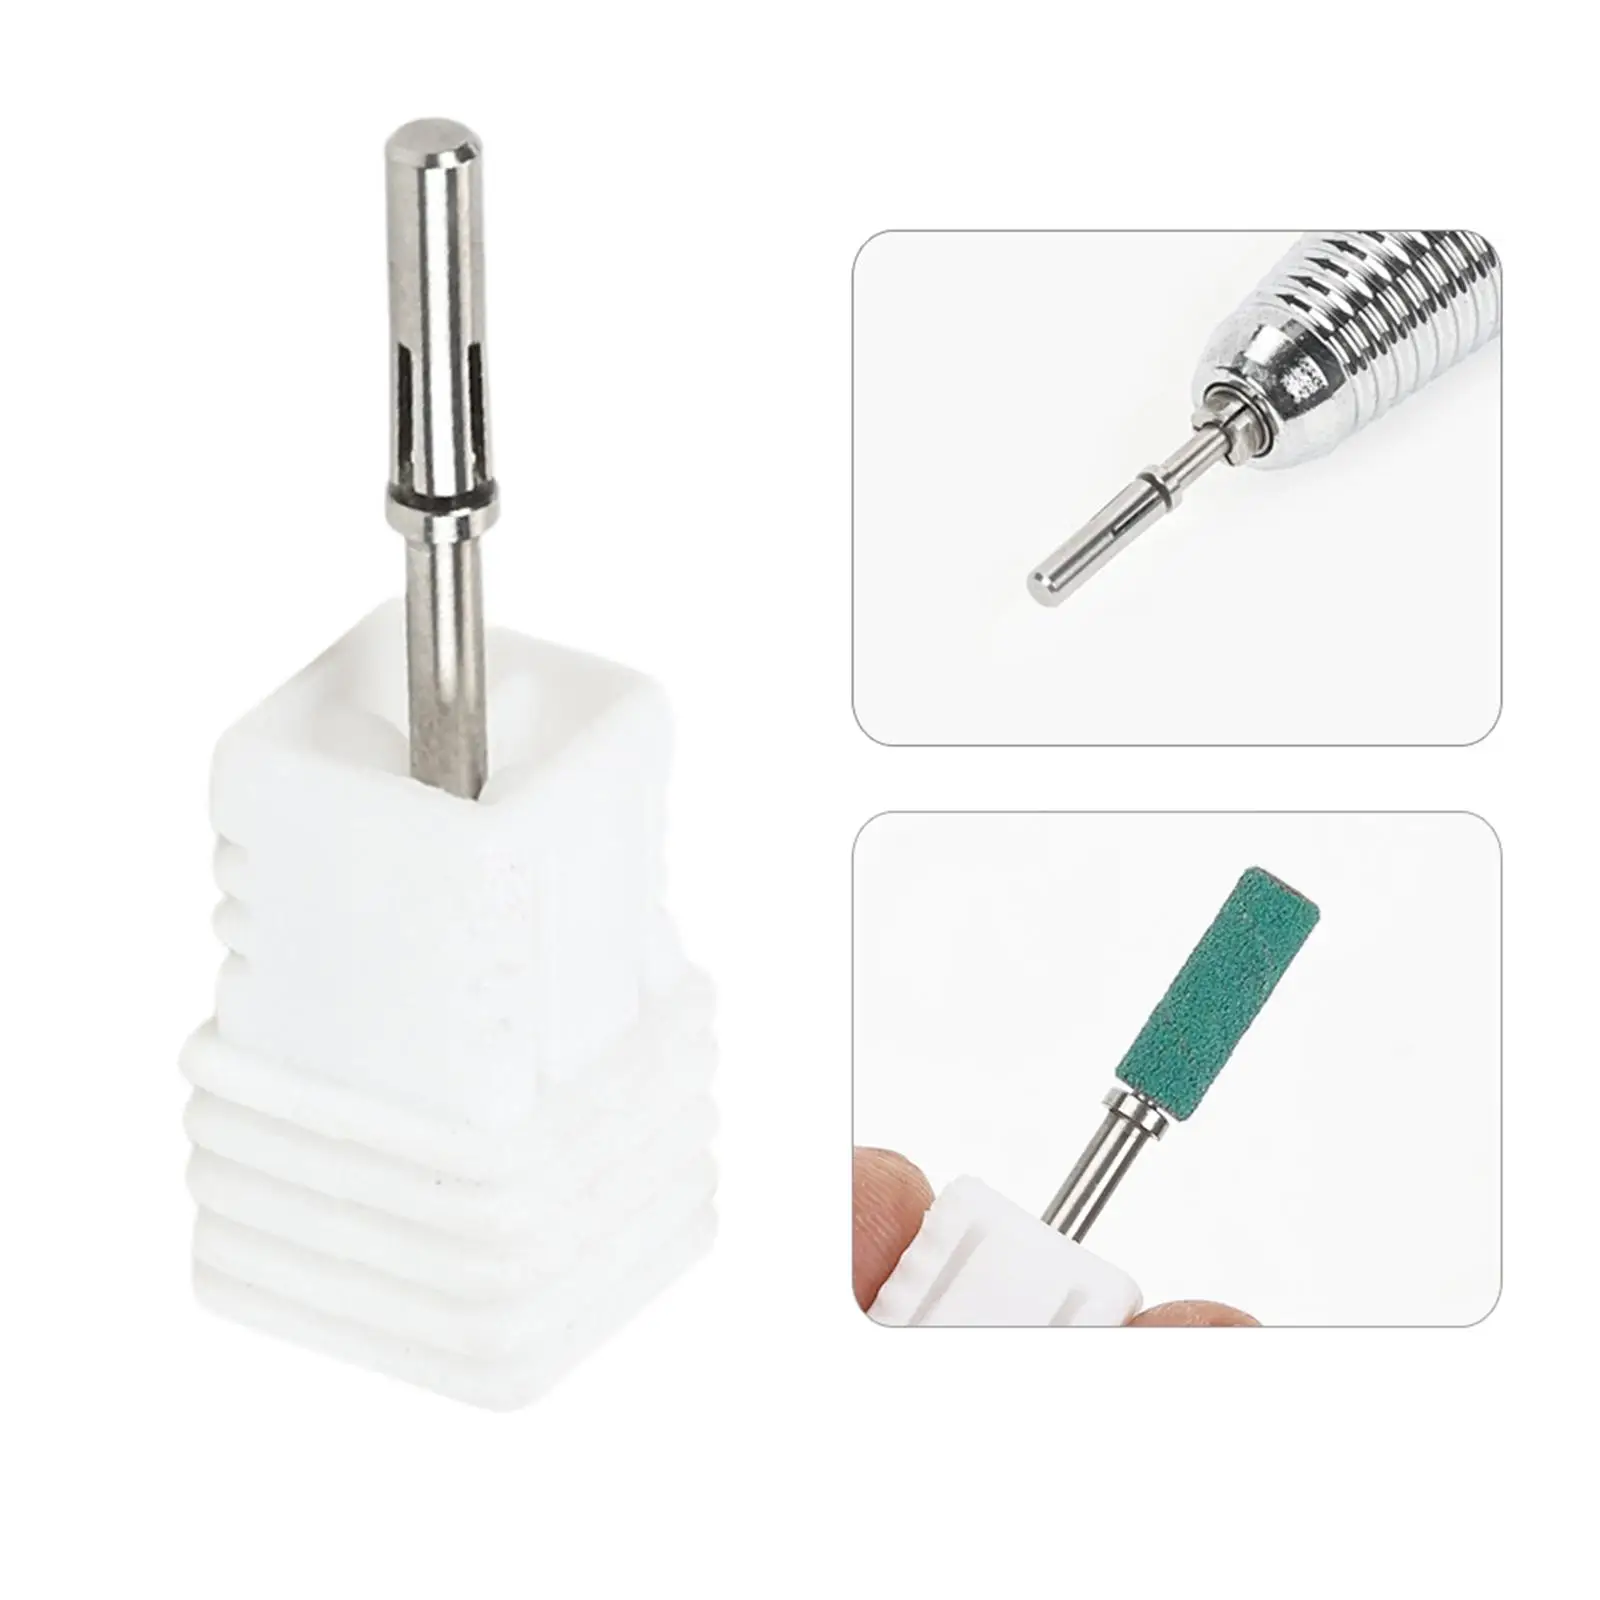 3.1mm Nail Sanding Bands Mandrel Nail Drill Accessories Nail Drill Heads for Manicure Home Salon SPA Manicure Pedicures